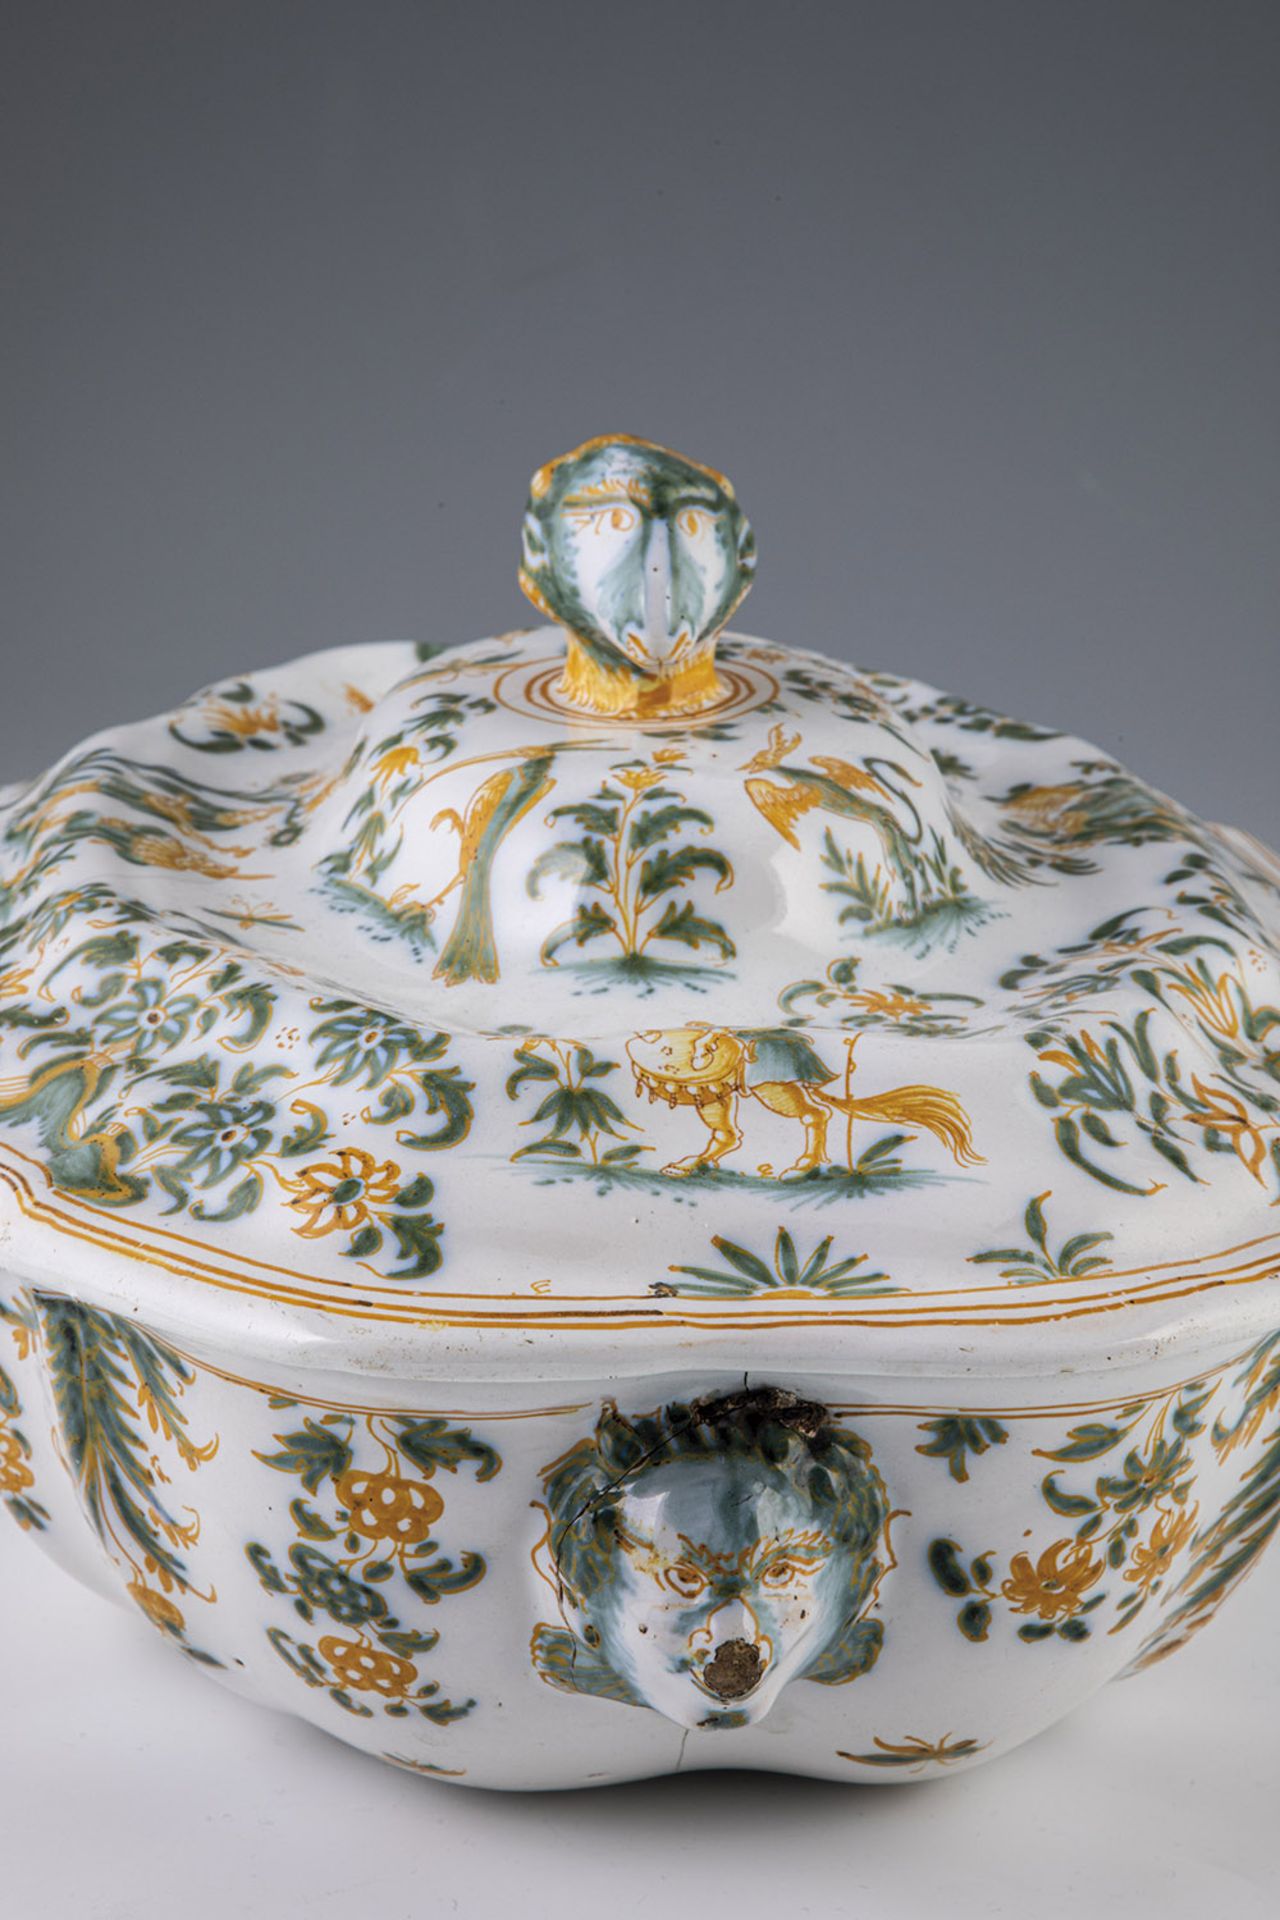 Large lidded tureen with grotesque decoration - Image 2 of 2